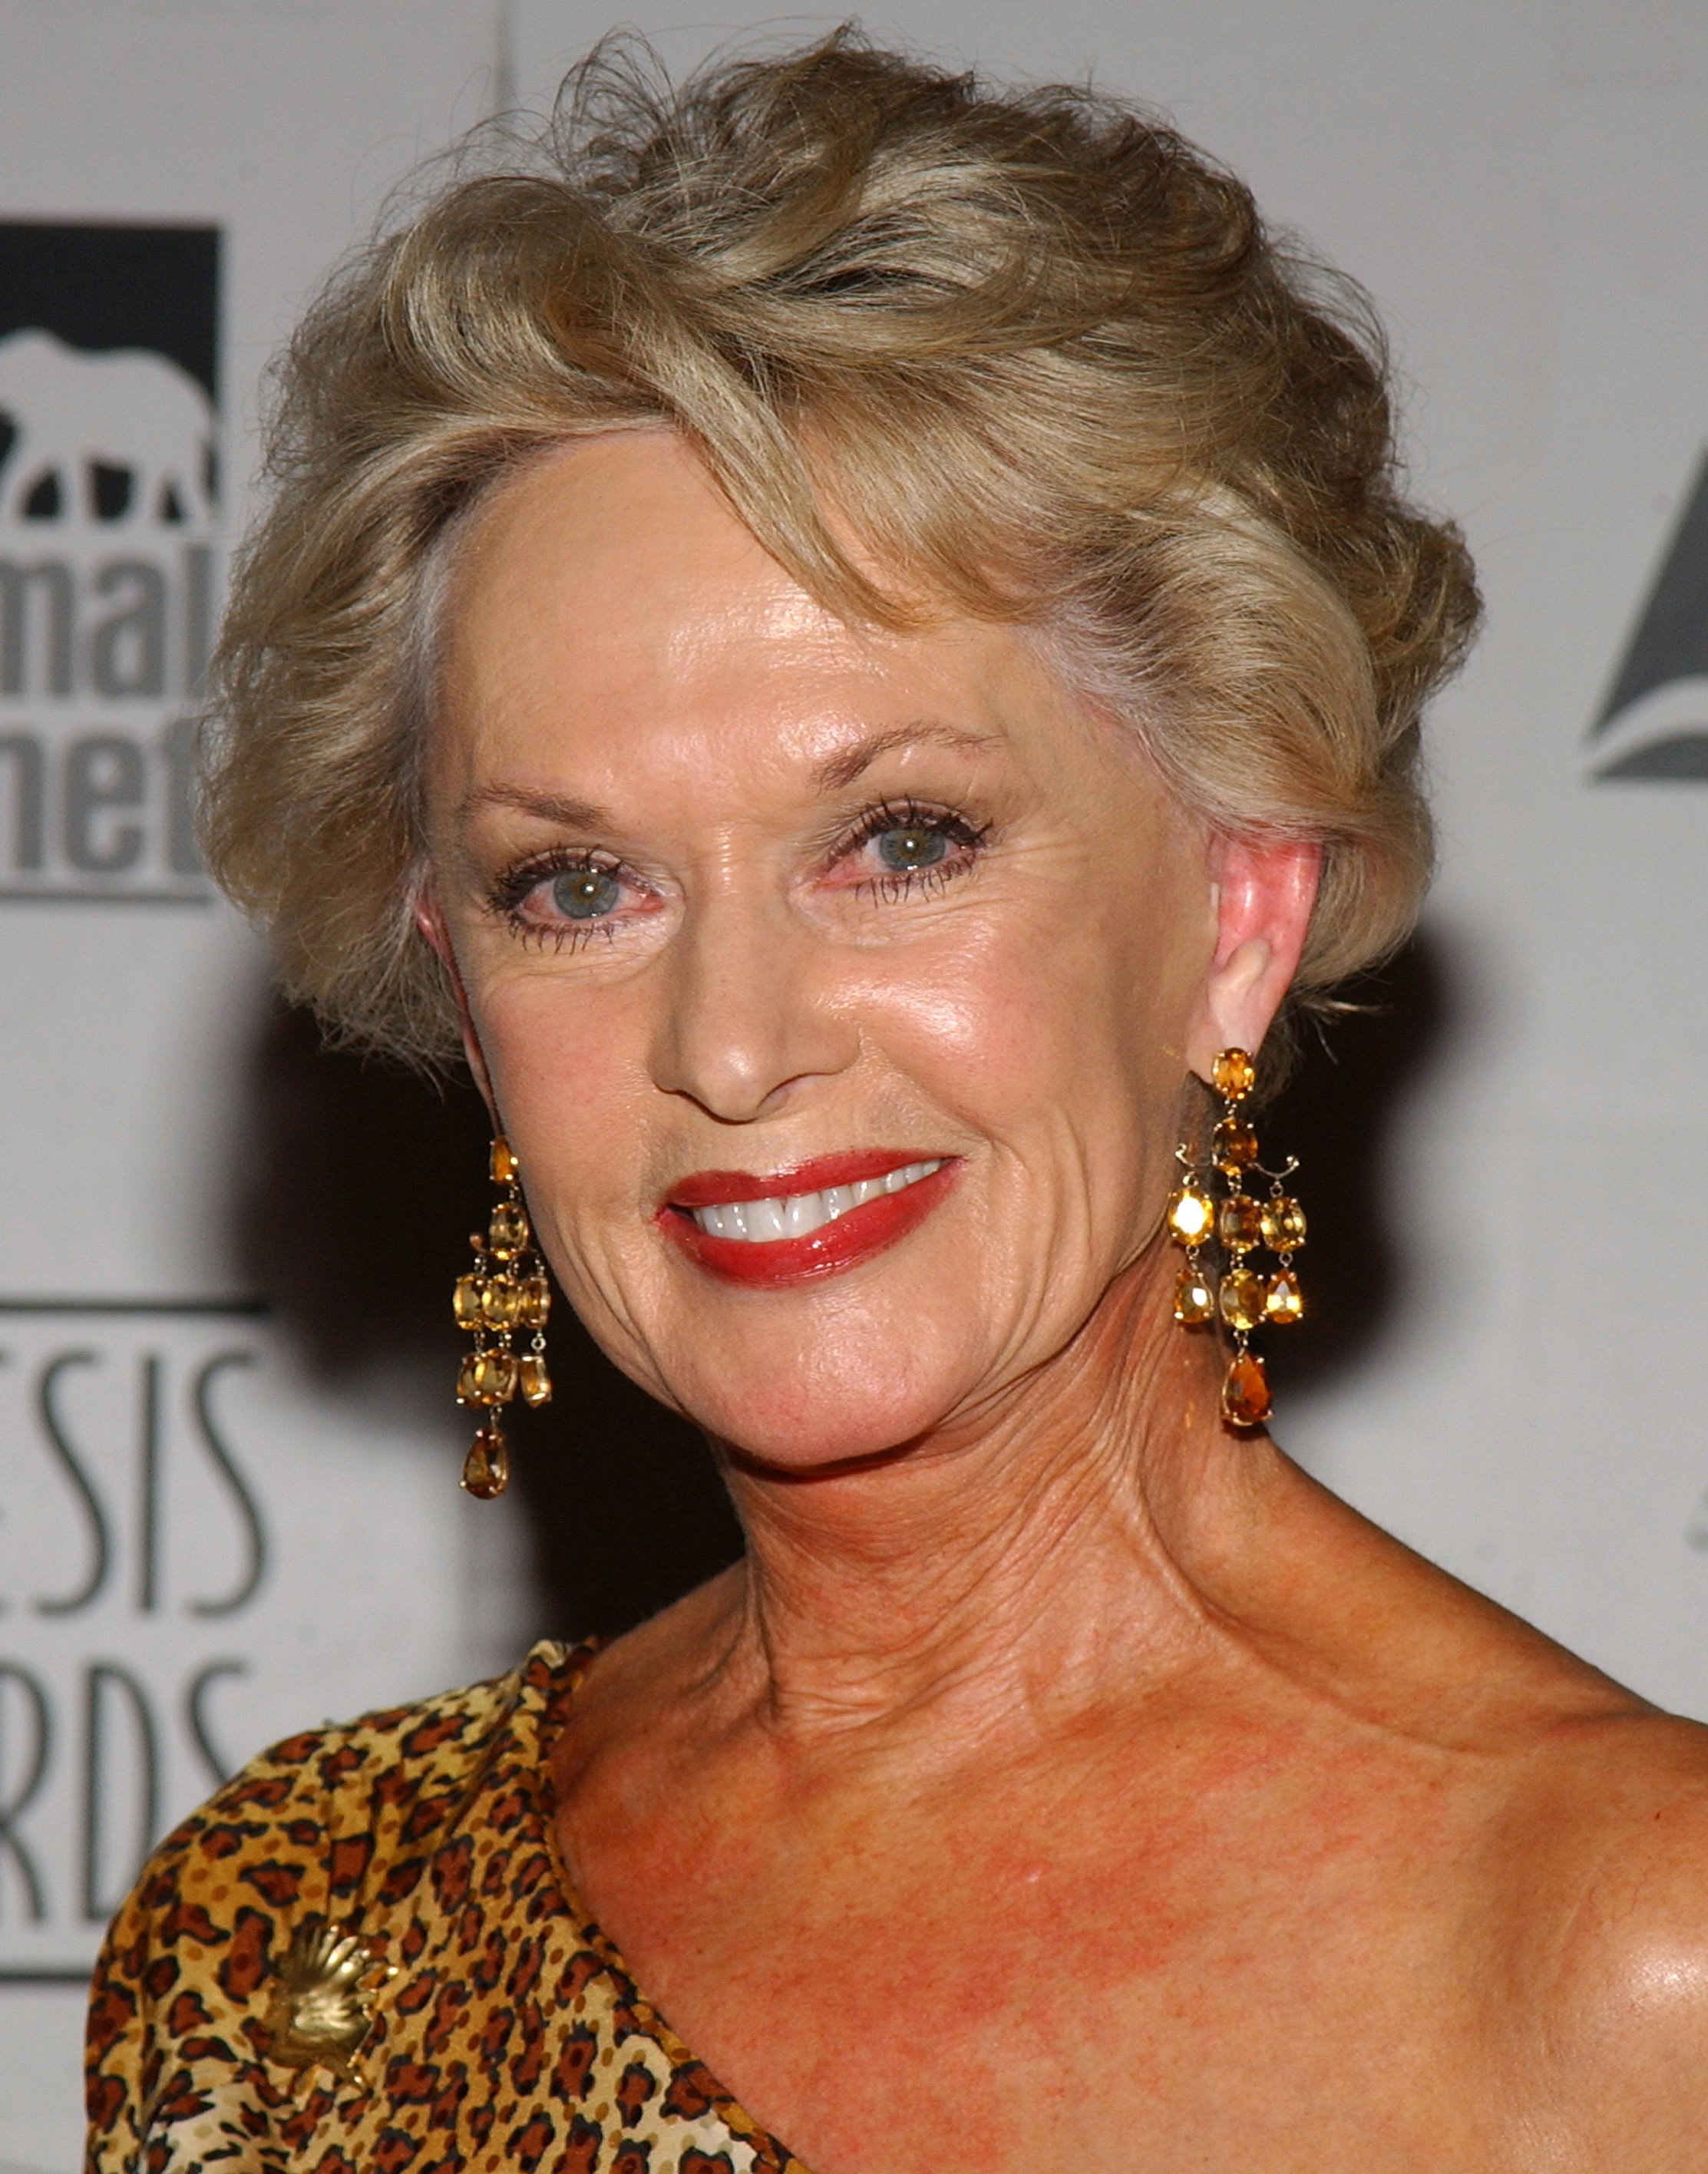 Tippi Hedren during The 18th Annual Genesis Awards and 50th Anniversary of the Humane Society of the United States | Photo: Getty Images